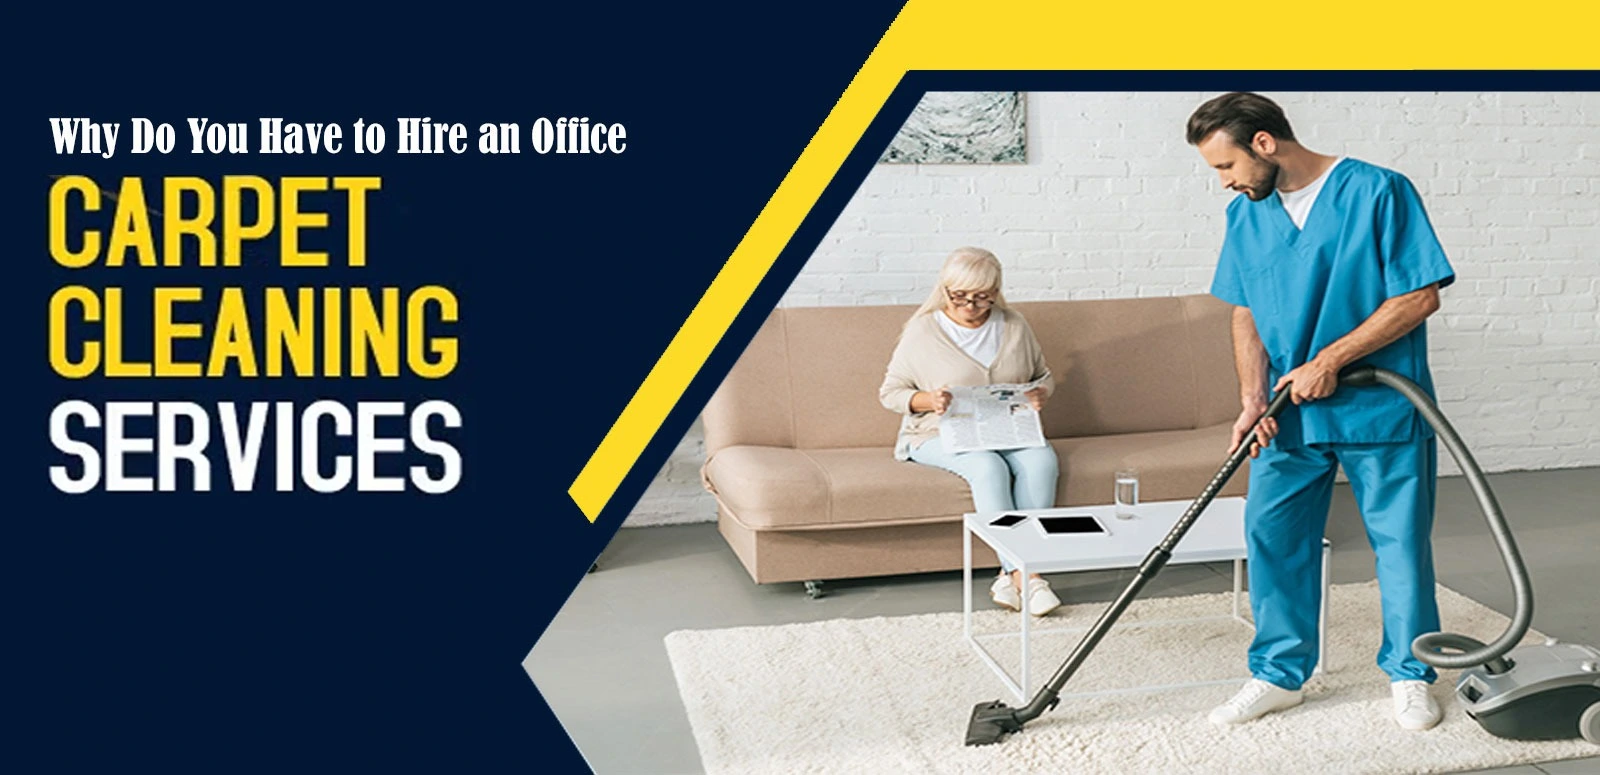 Why Do You Have to Hire an Office Carpet Cleaning Service